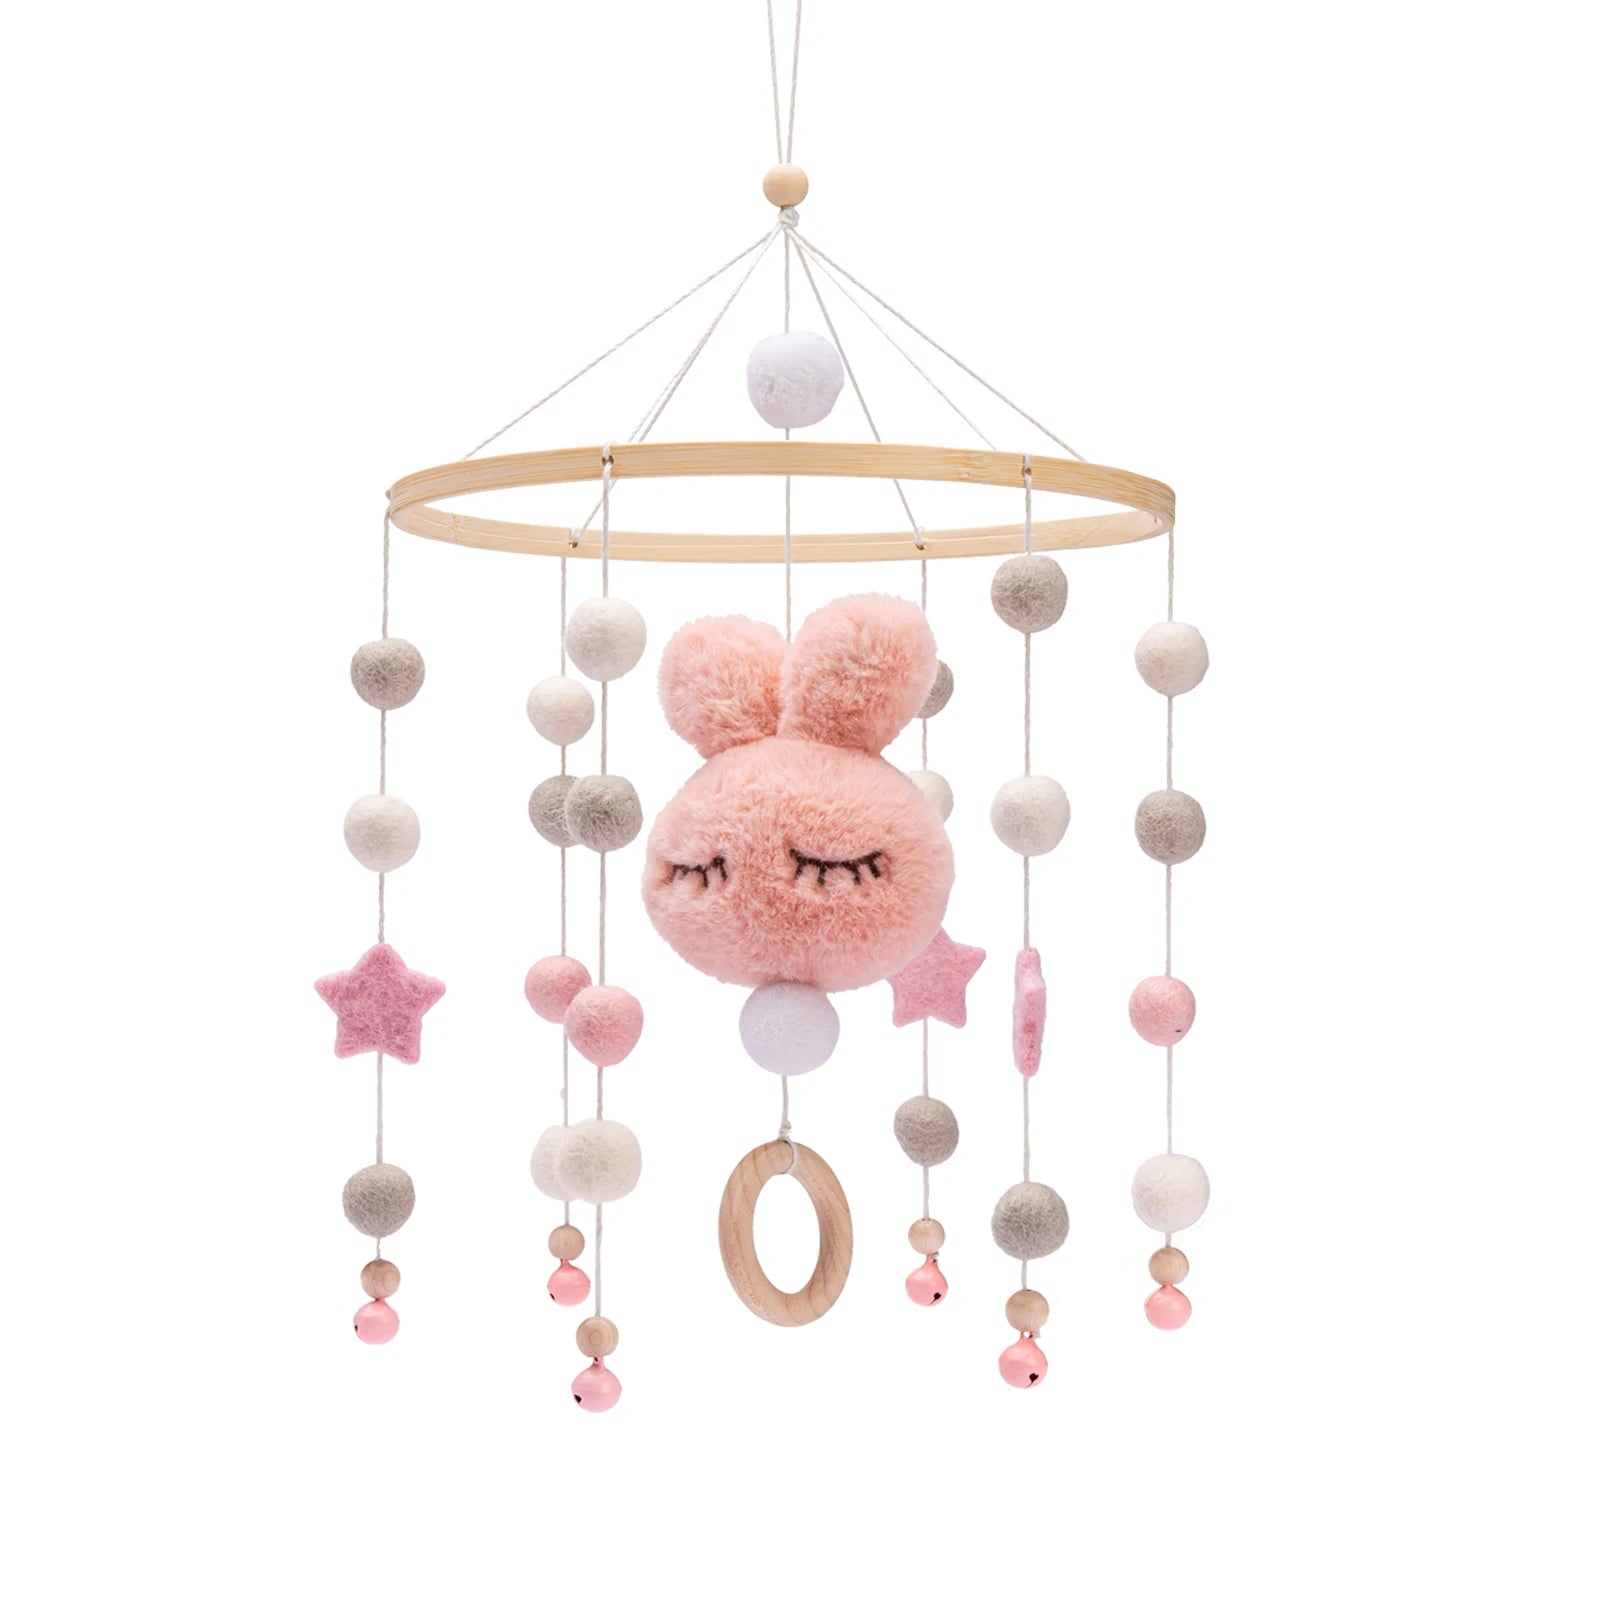 Dreamy Delights: Newborn Bed Bell Baby Rattles - The Little Big Store